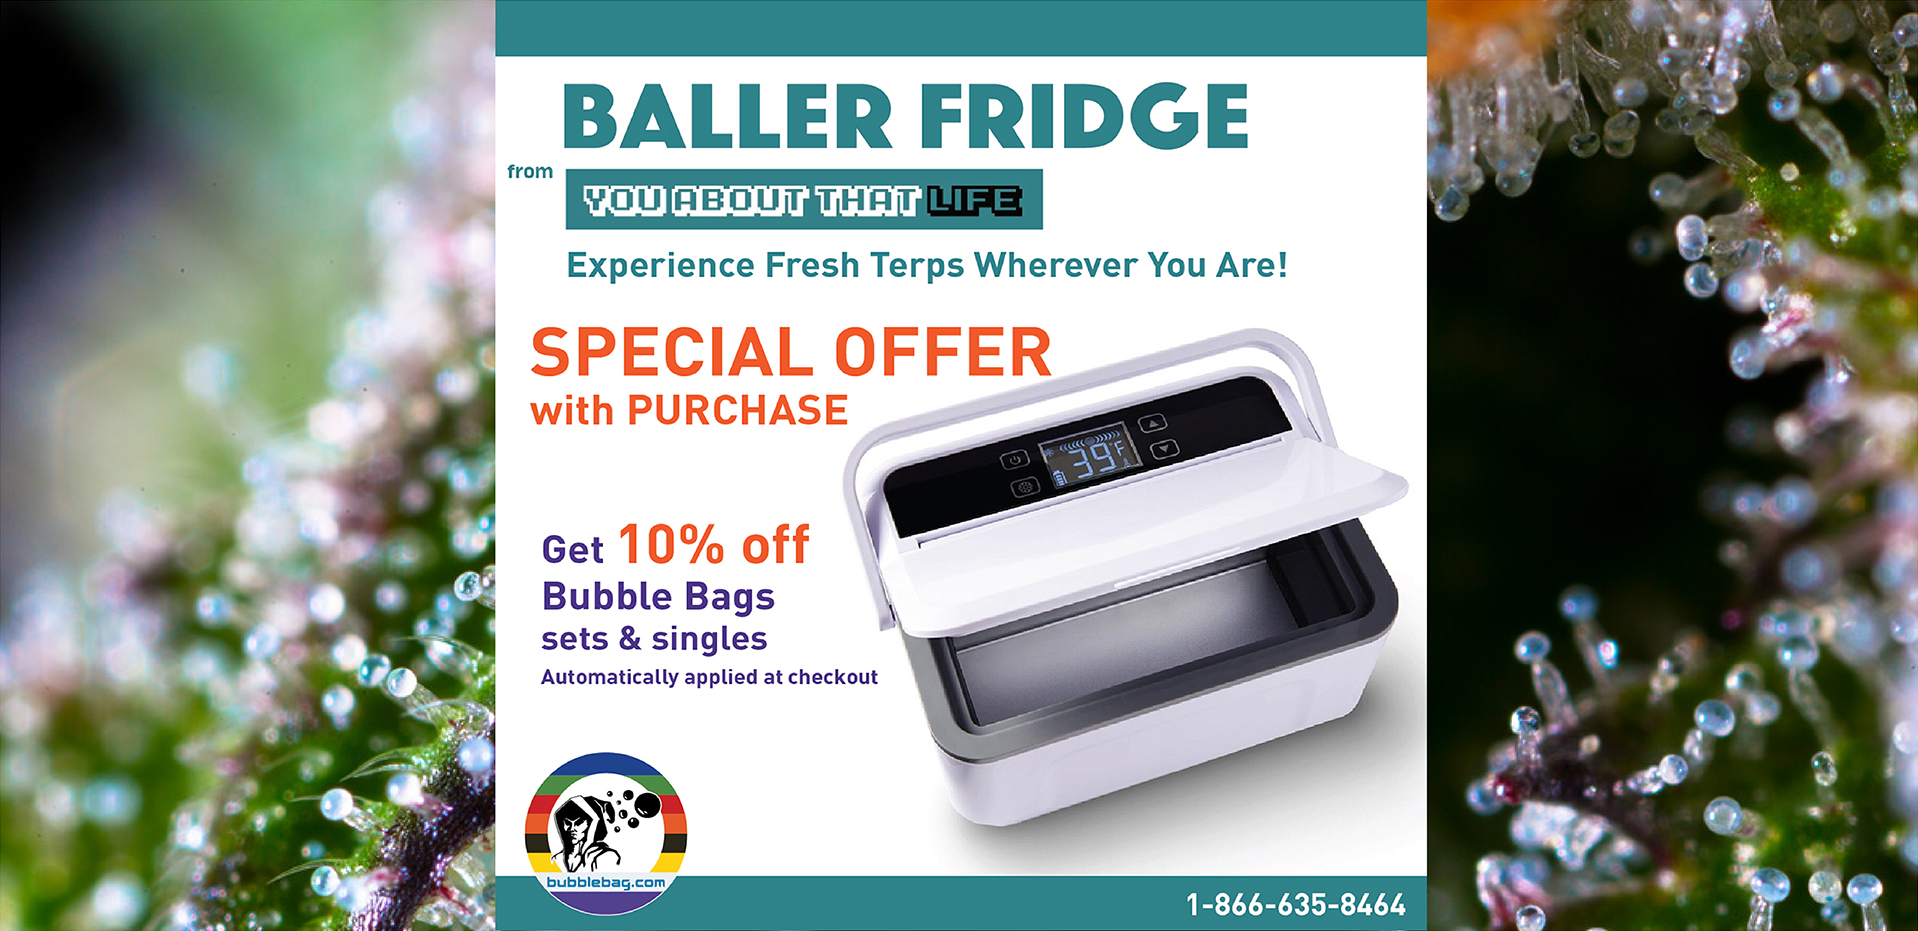 Get 10% off Bubble Bags with the purchase of a Baller Fridge